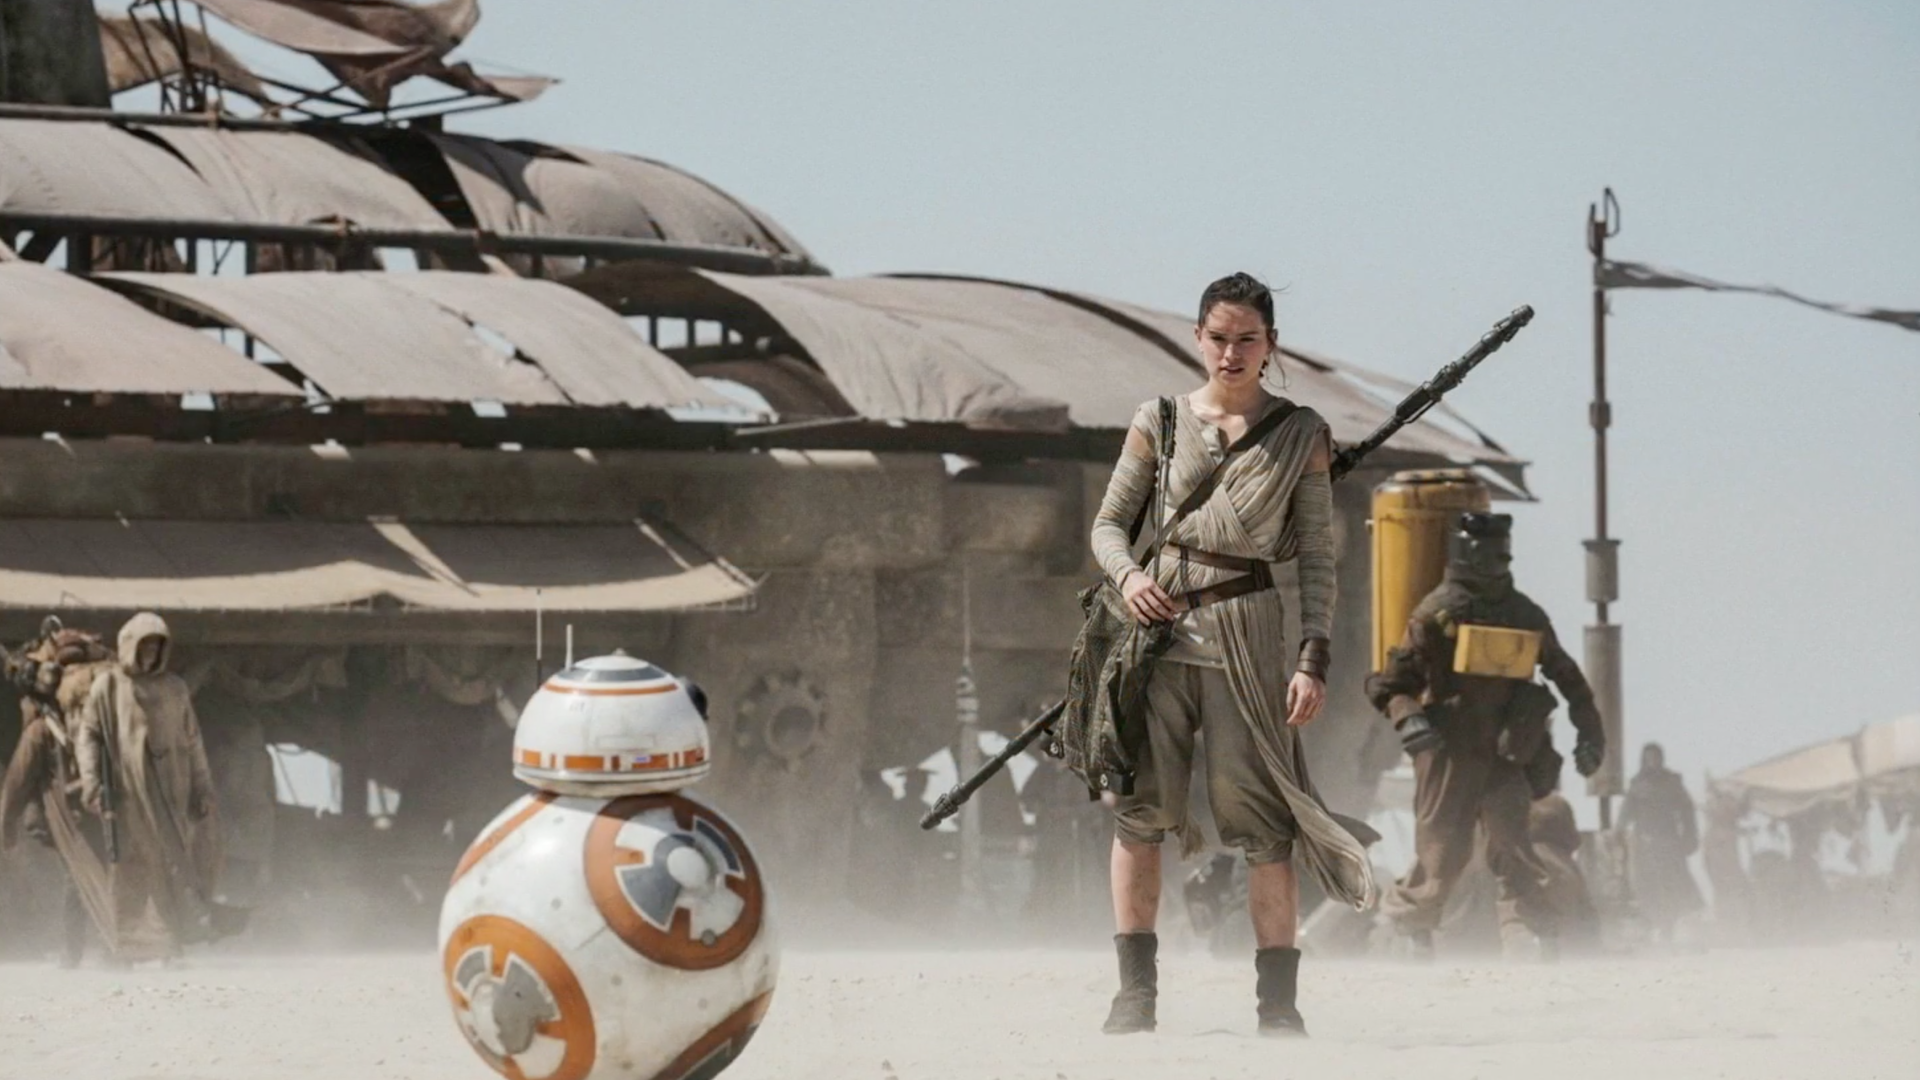 Star Wars The Force Awakens R2D2 for 1920 x 1080 HDTV 1080p resolution